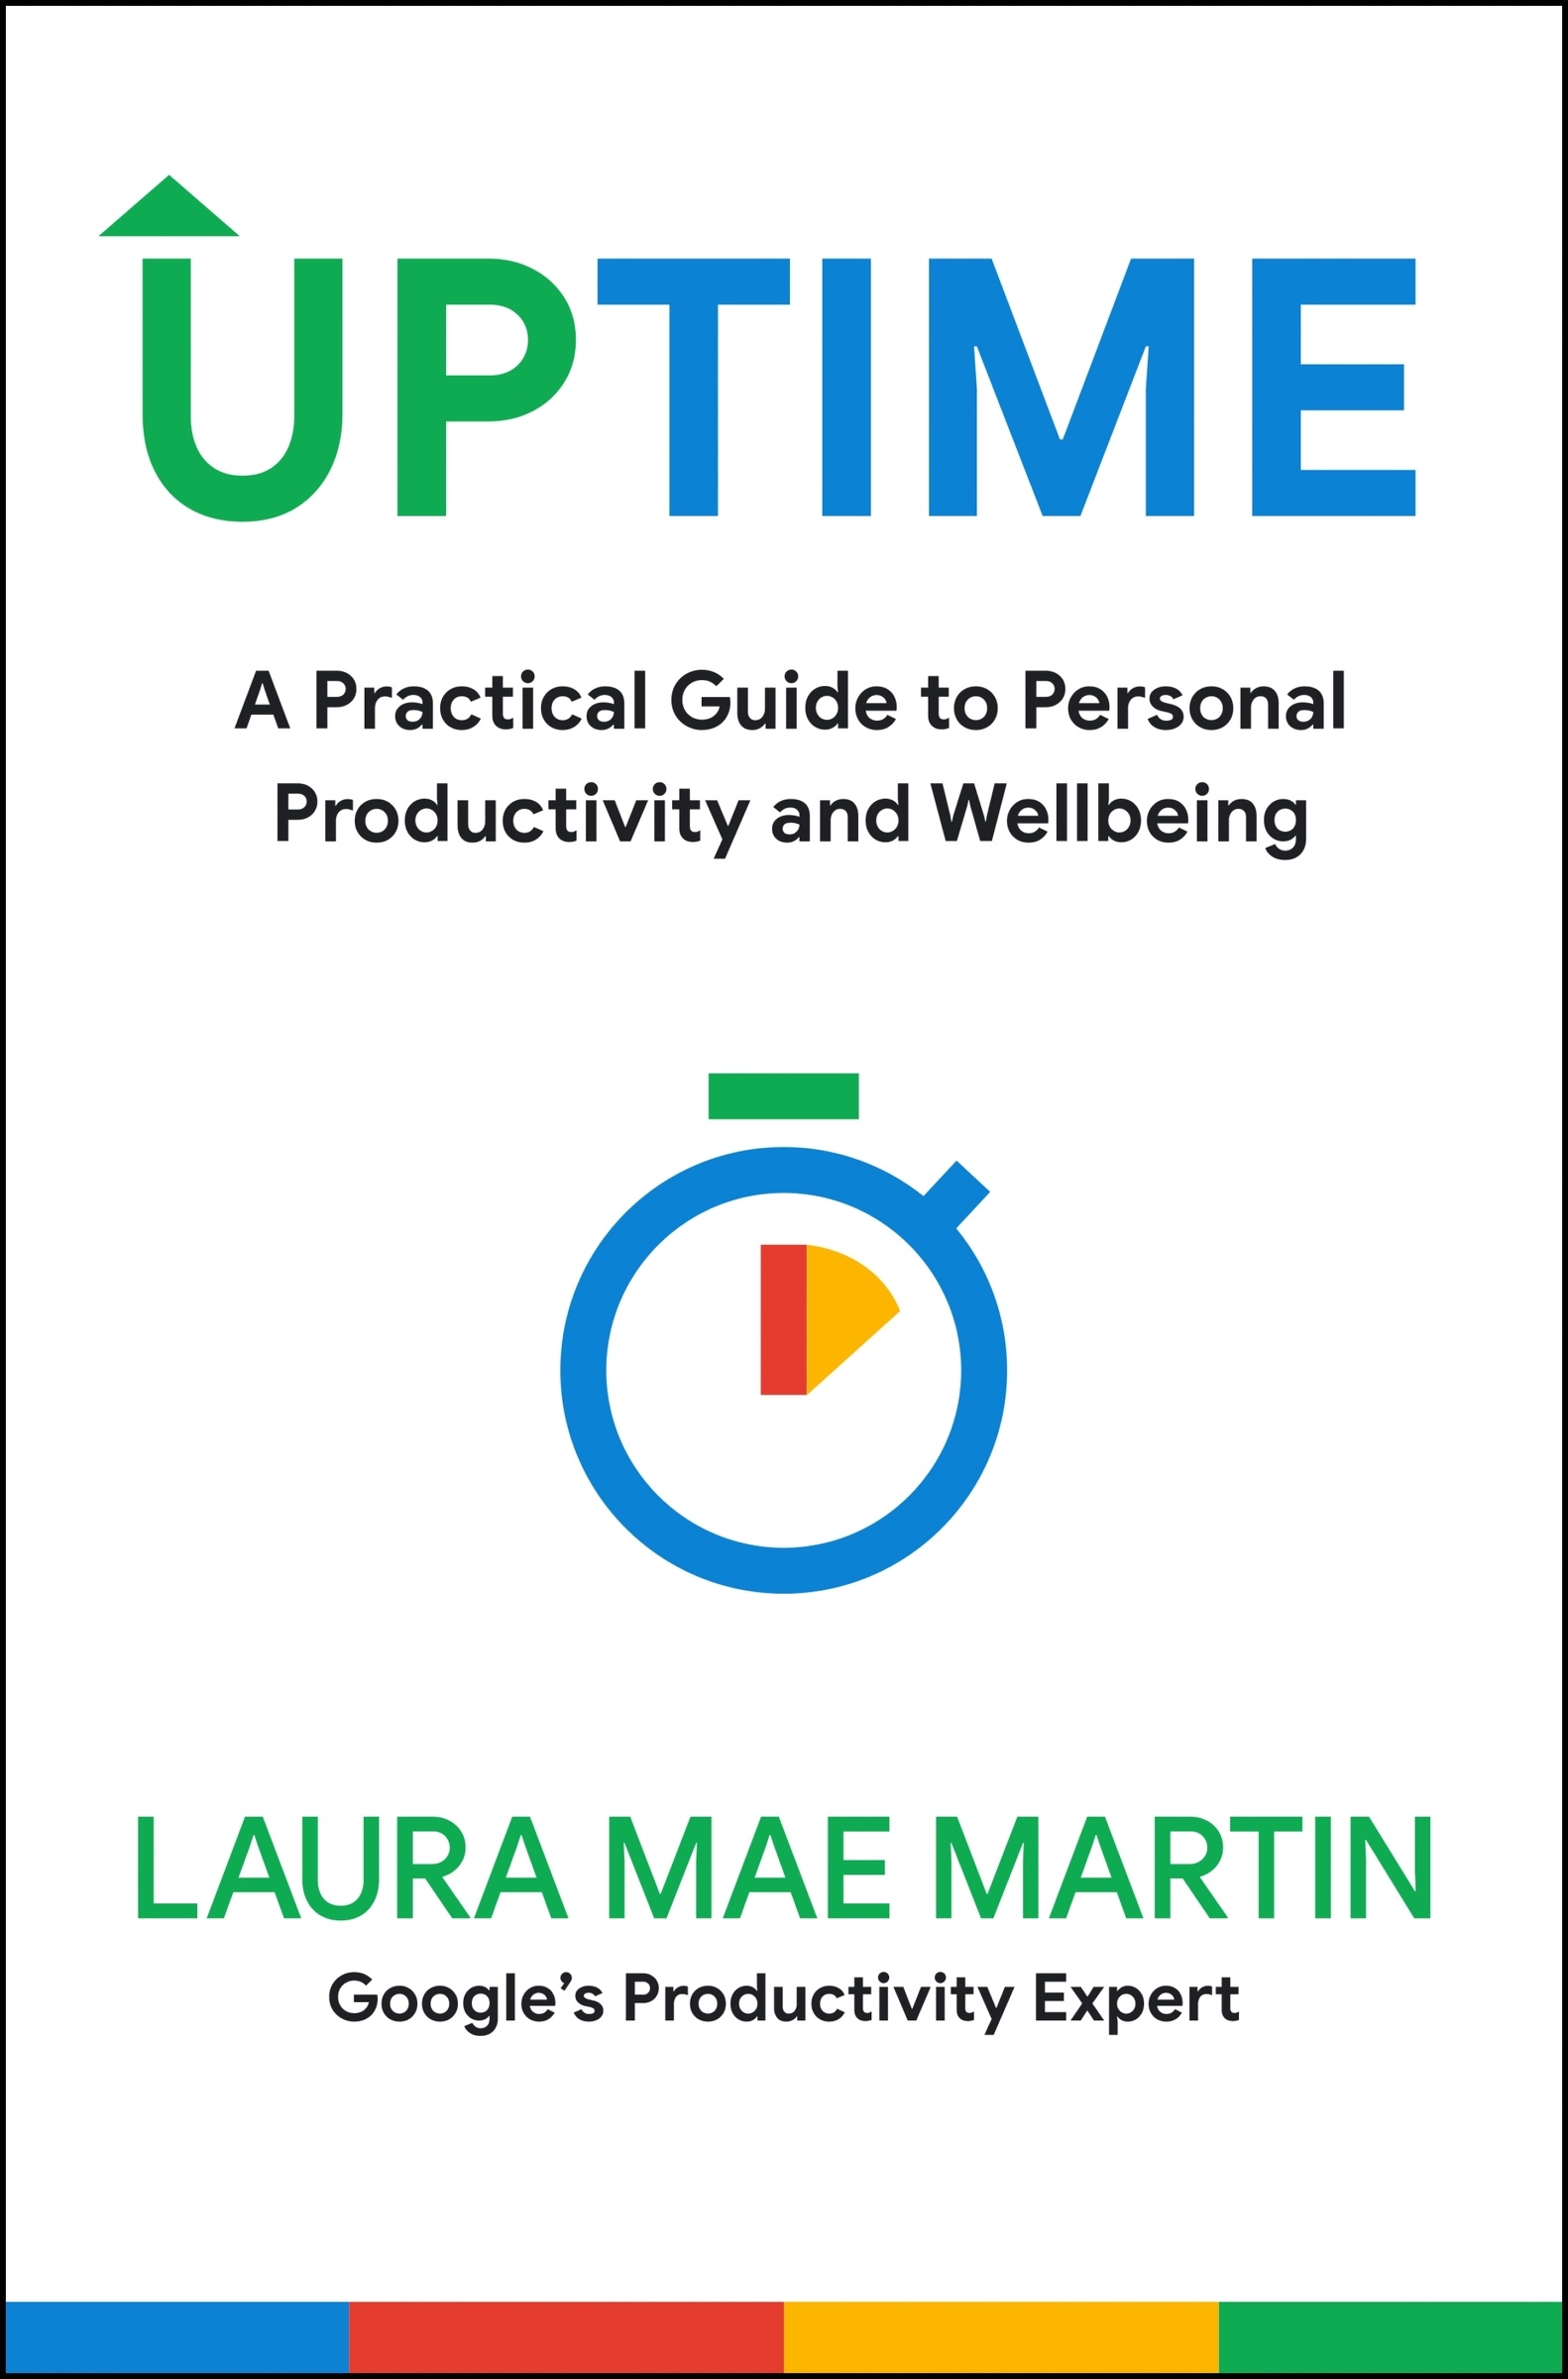 Uptime A Practical Guide to Personal Productivity and Wellbeing cover image